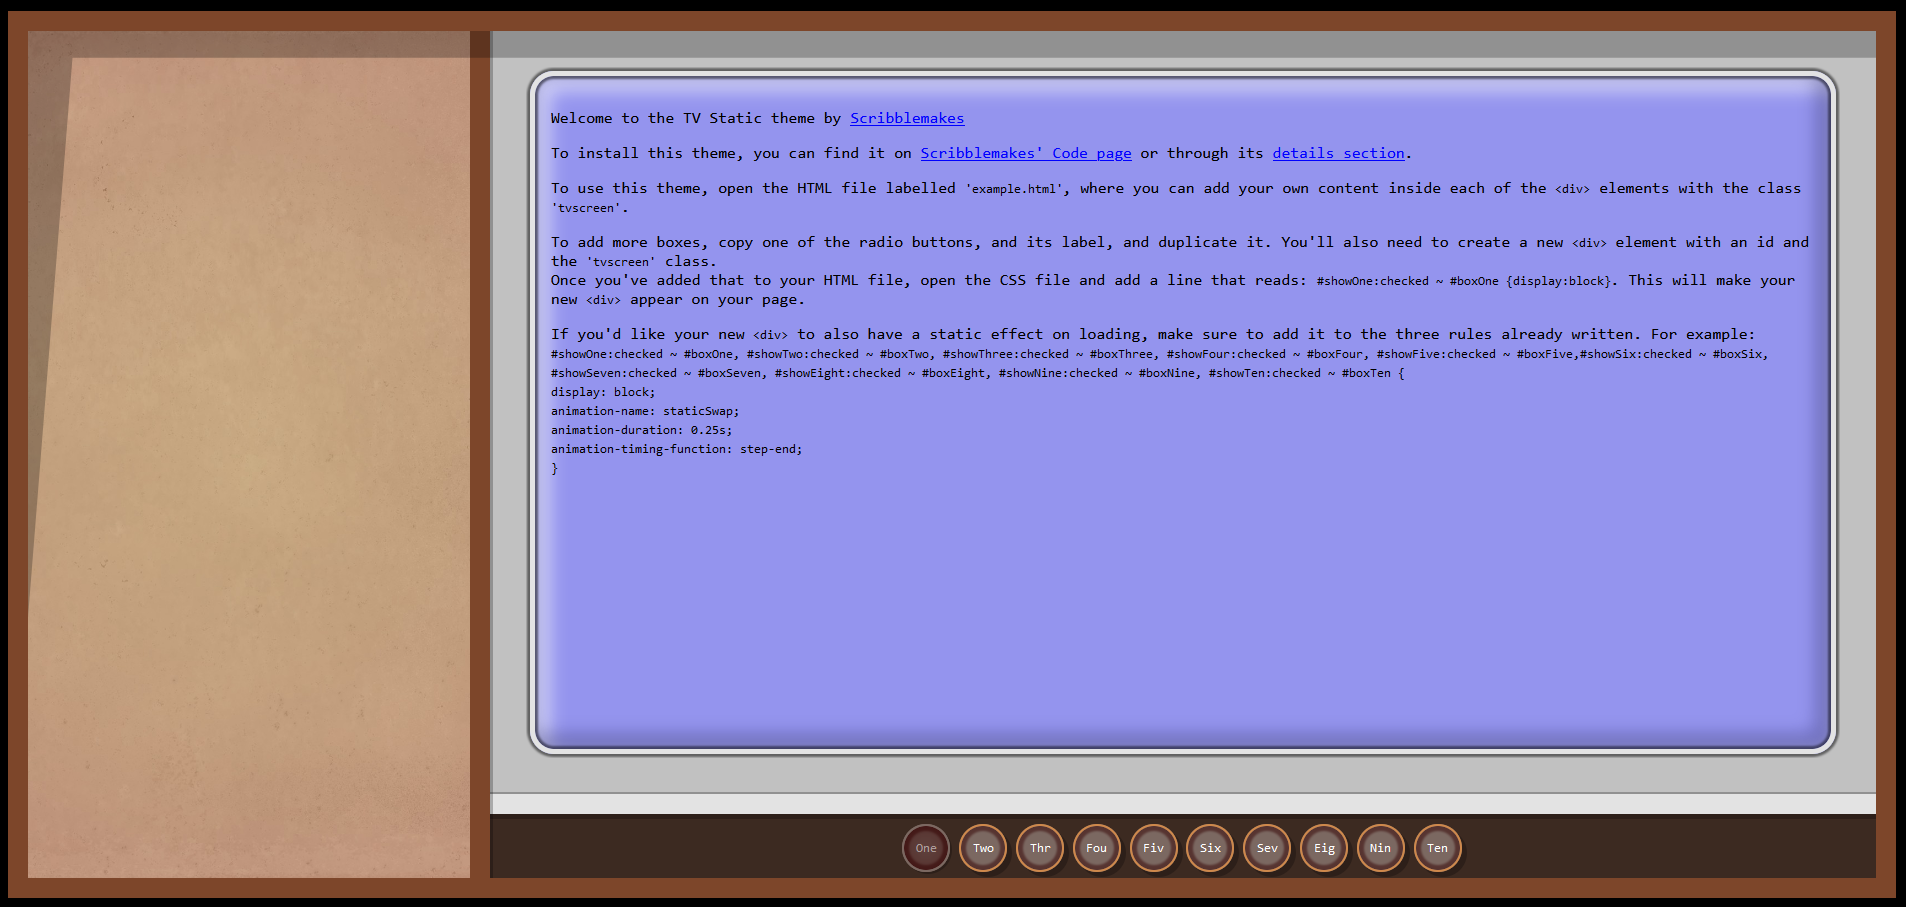 An image showing a preview of the TV Static theme.